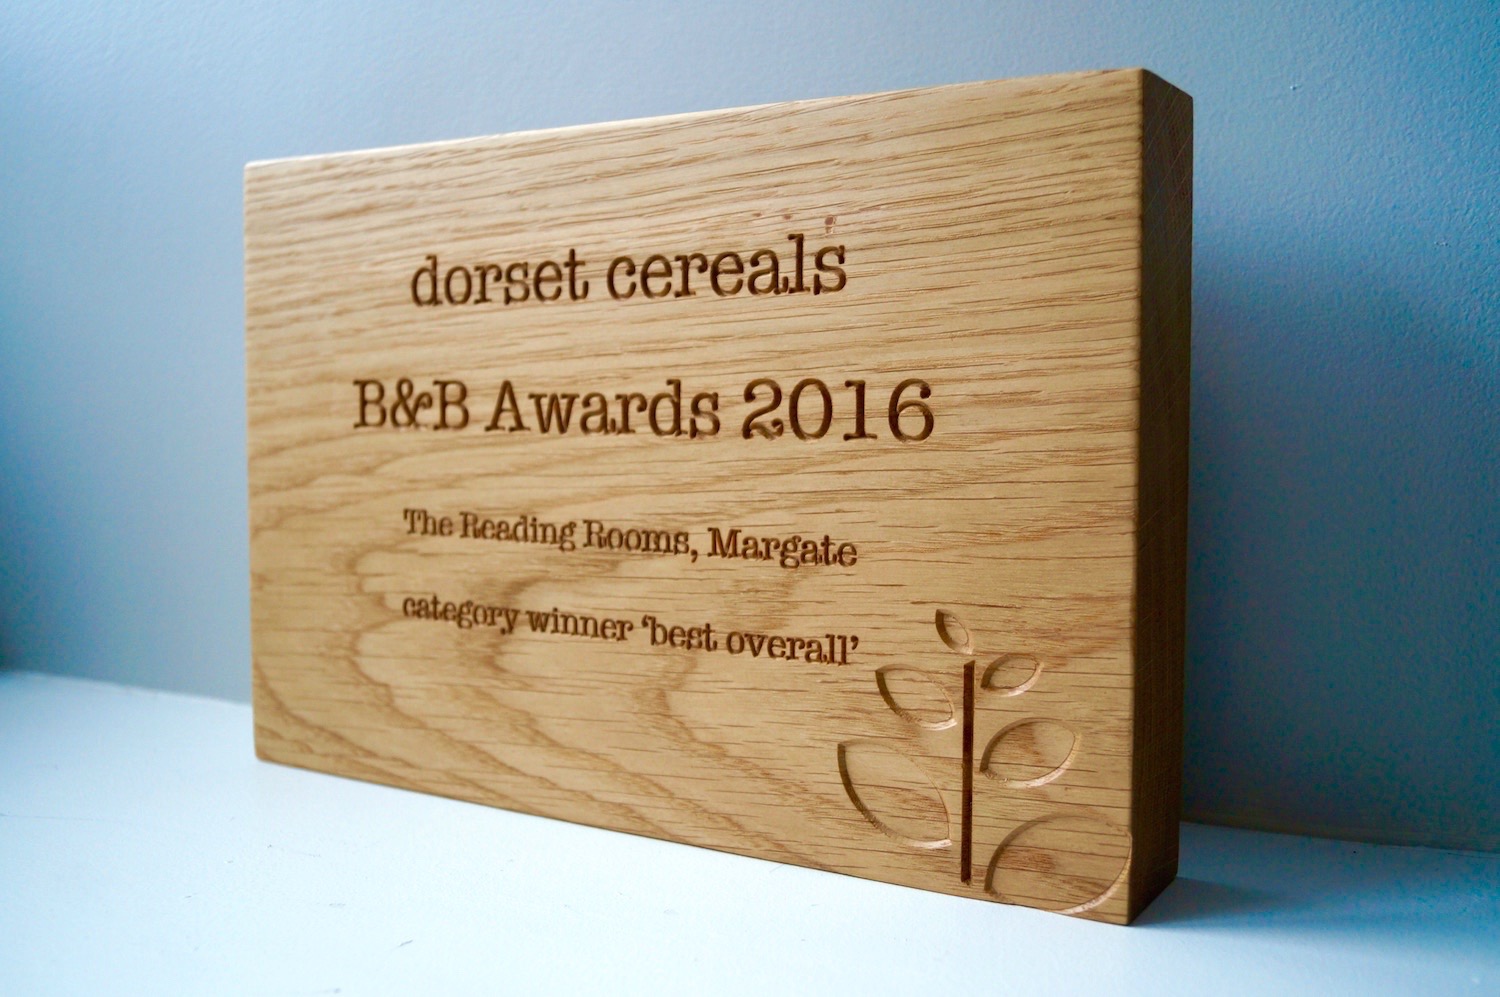 Personalised Wooden Award Plaques for Dorset Cereals